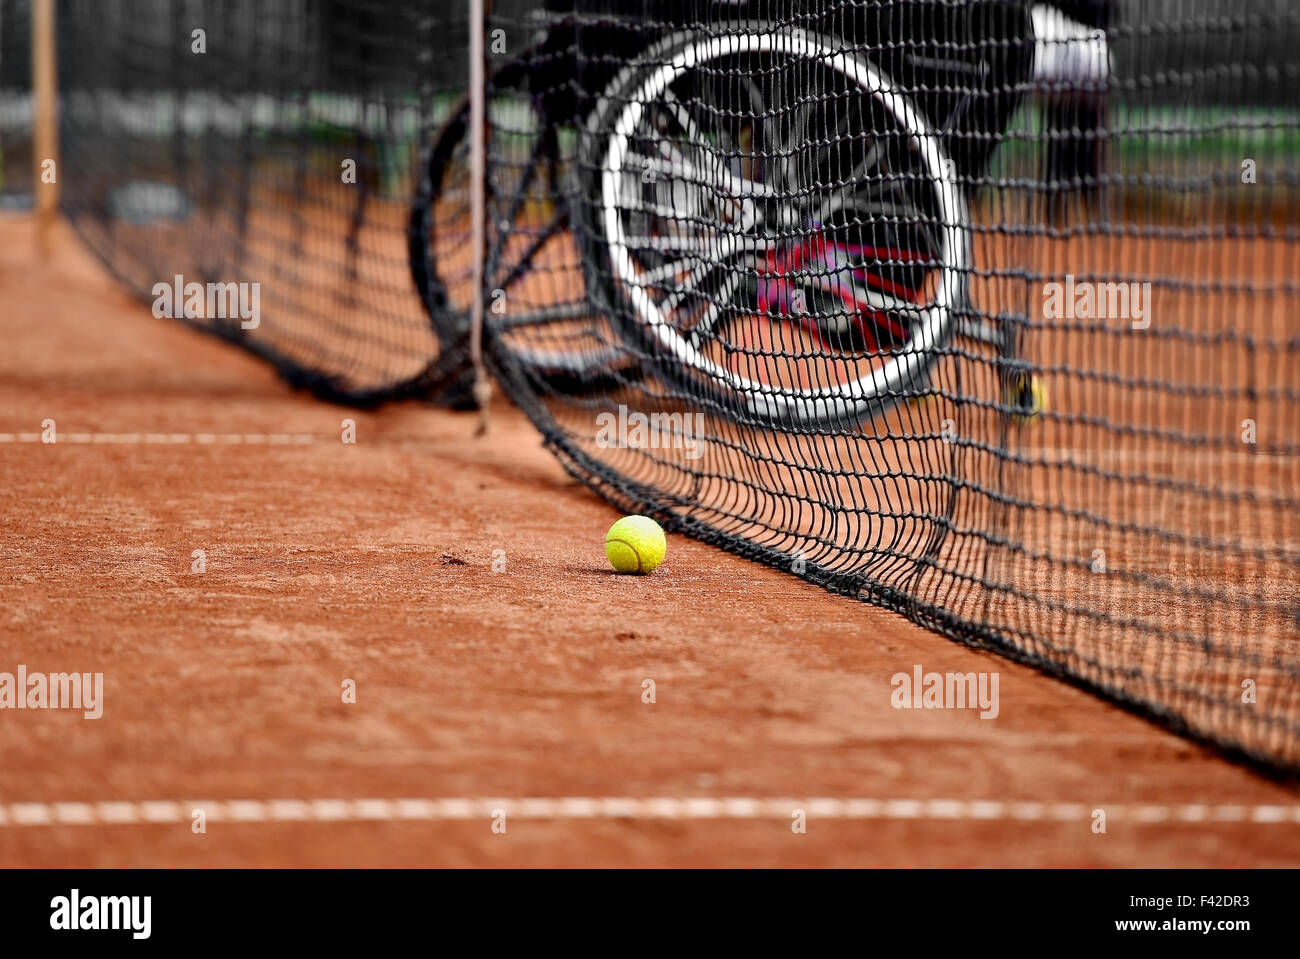 Unfocused wheelchair tennis player is seen behind a tennis net on a clay court Stock Photo